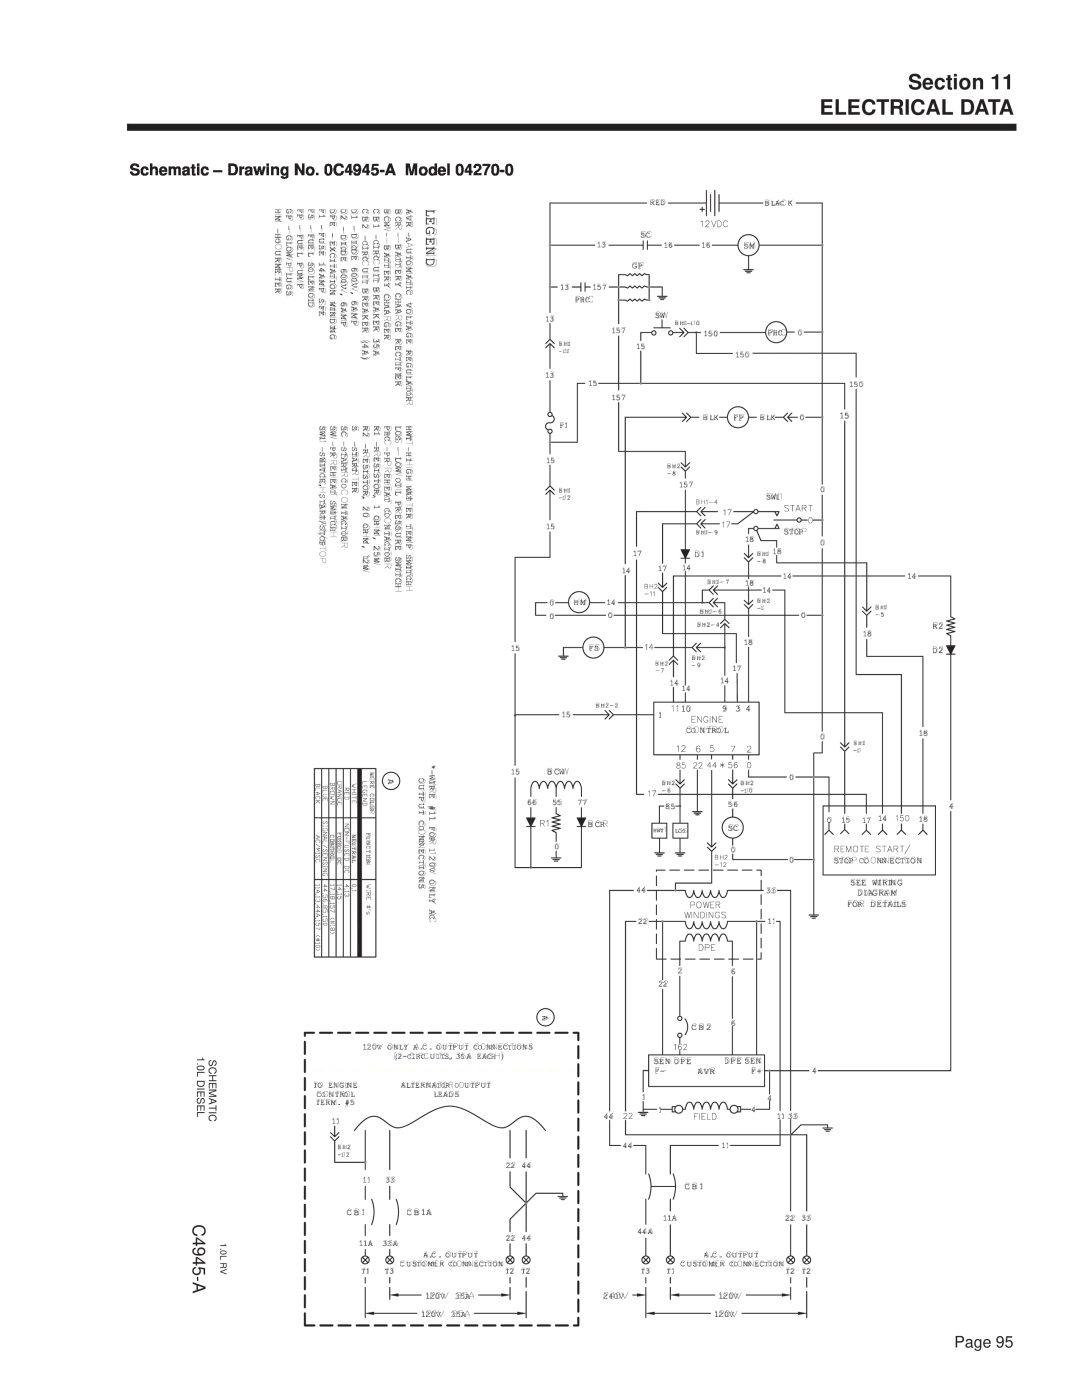 Guardian Technologies 4270 manual Section ELECTRICAL DATA, Schematic - Drawing No. 0C4945-A Model, Page 